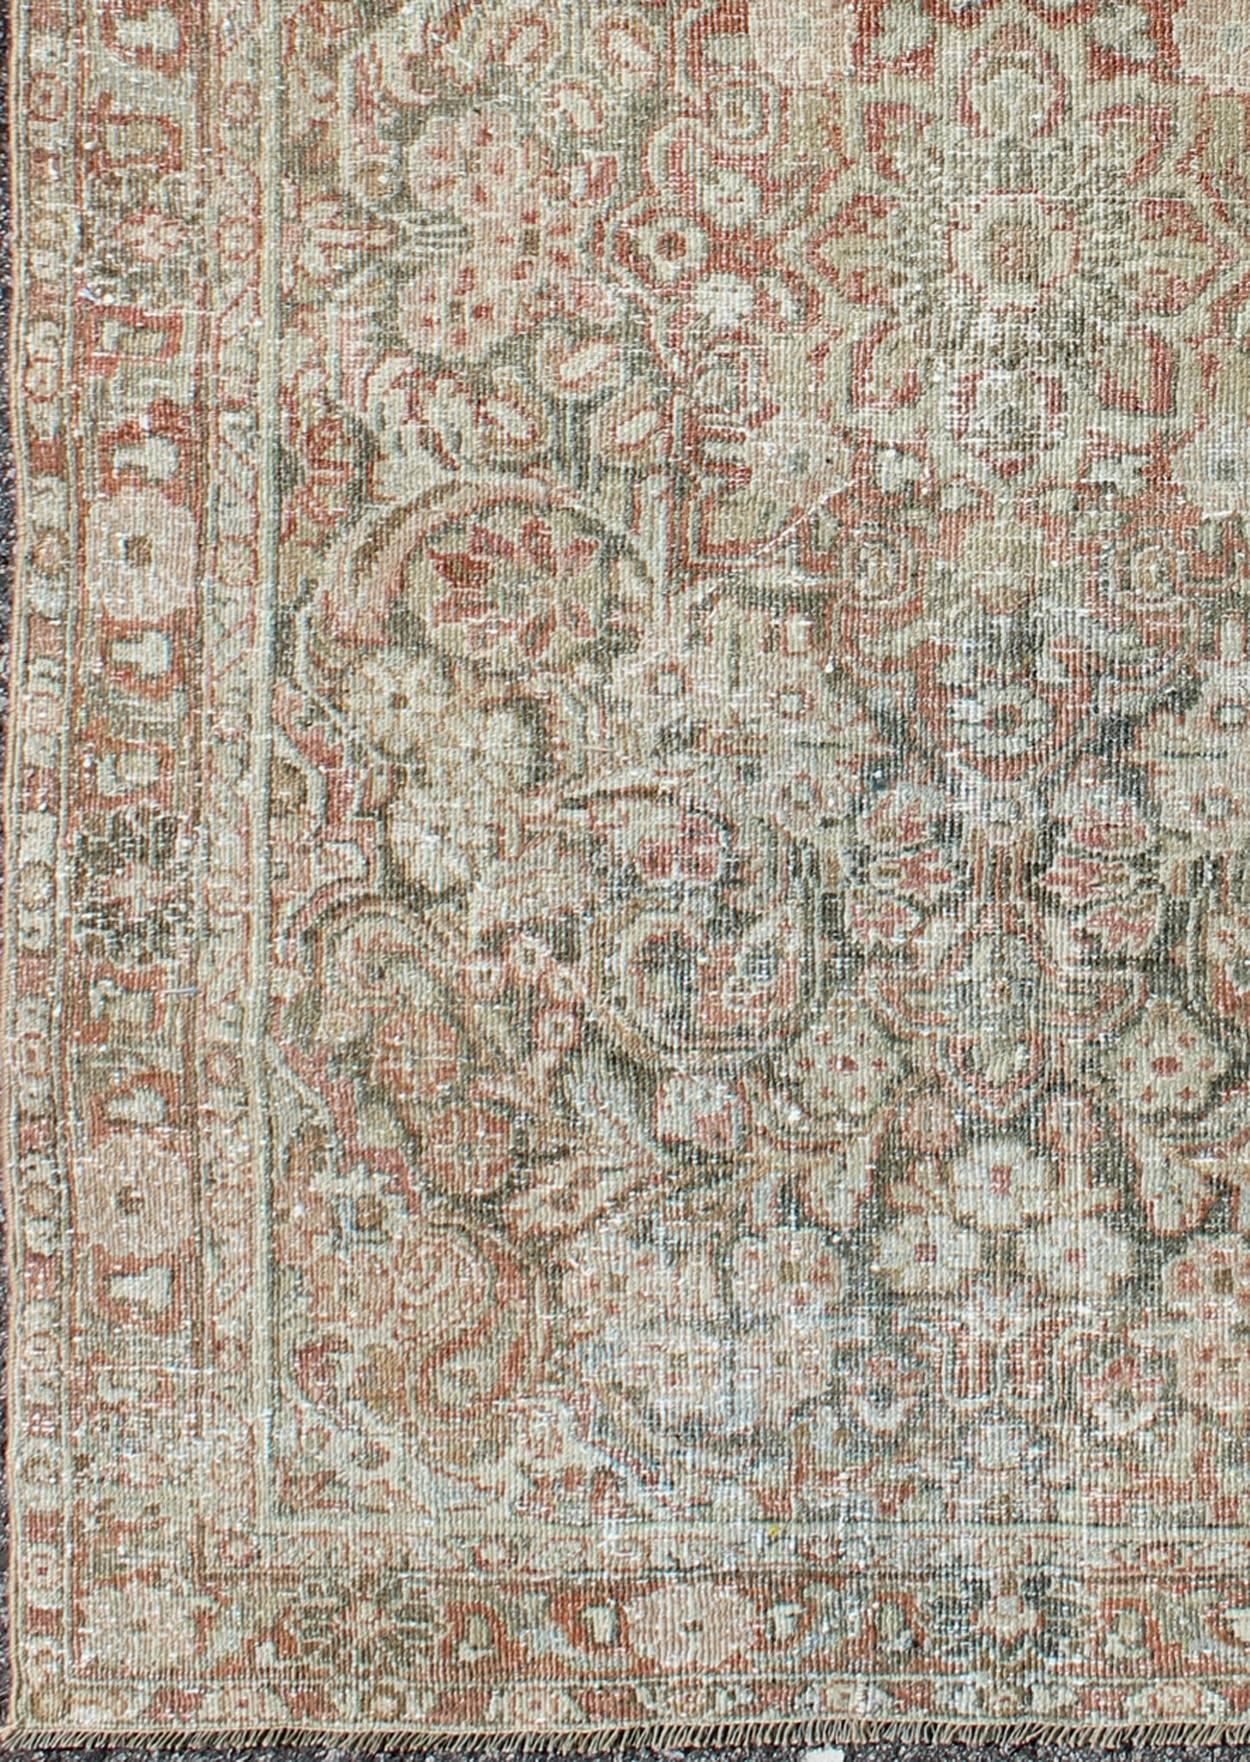 This Mahal relies heavily on exquisite details as well as large-scale flowers and palmettes. A fine trellis of beautifully colored large and small flowers sprawls across the faint green field, pulsating with alternating rhythms in contrasting ivory